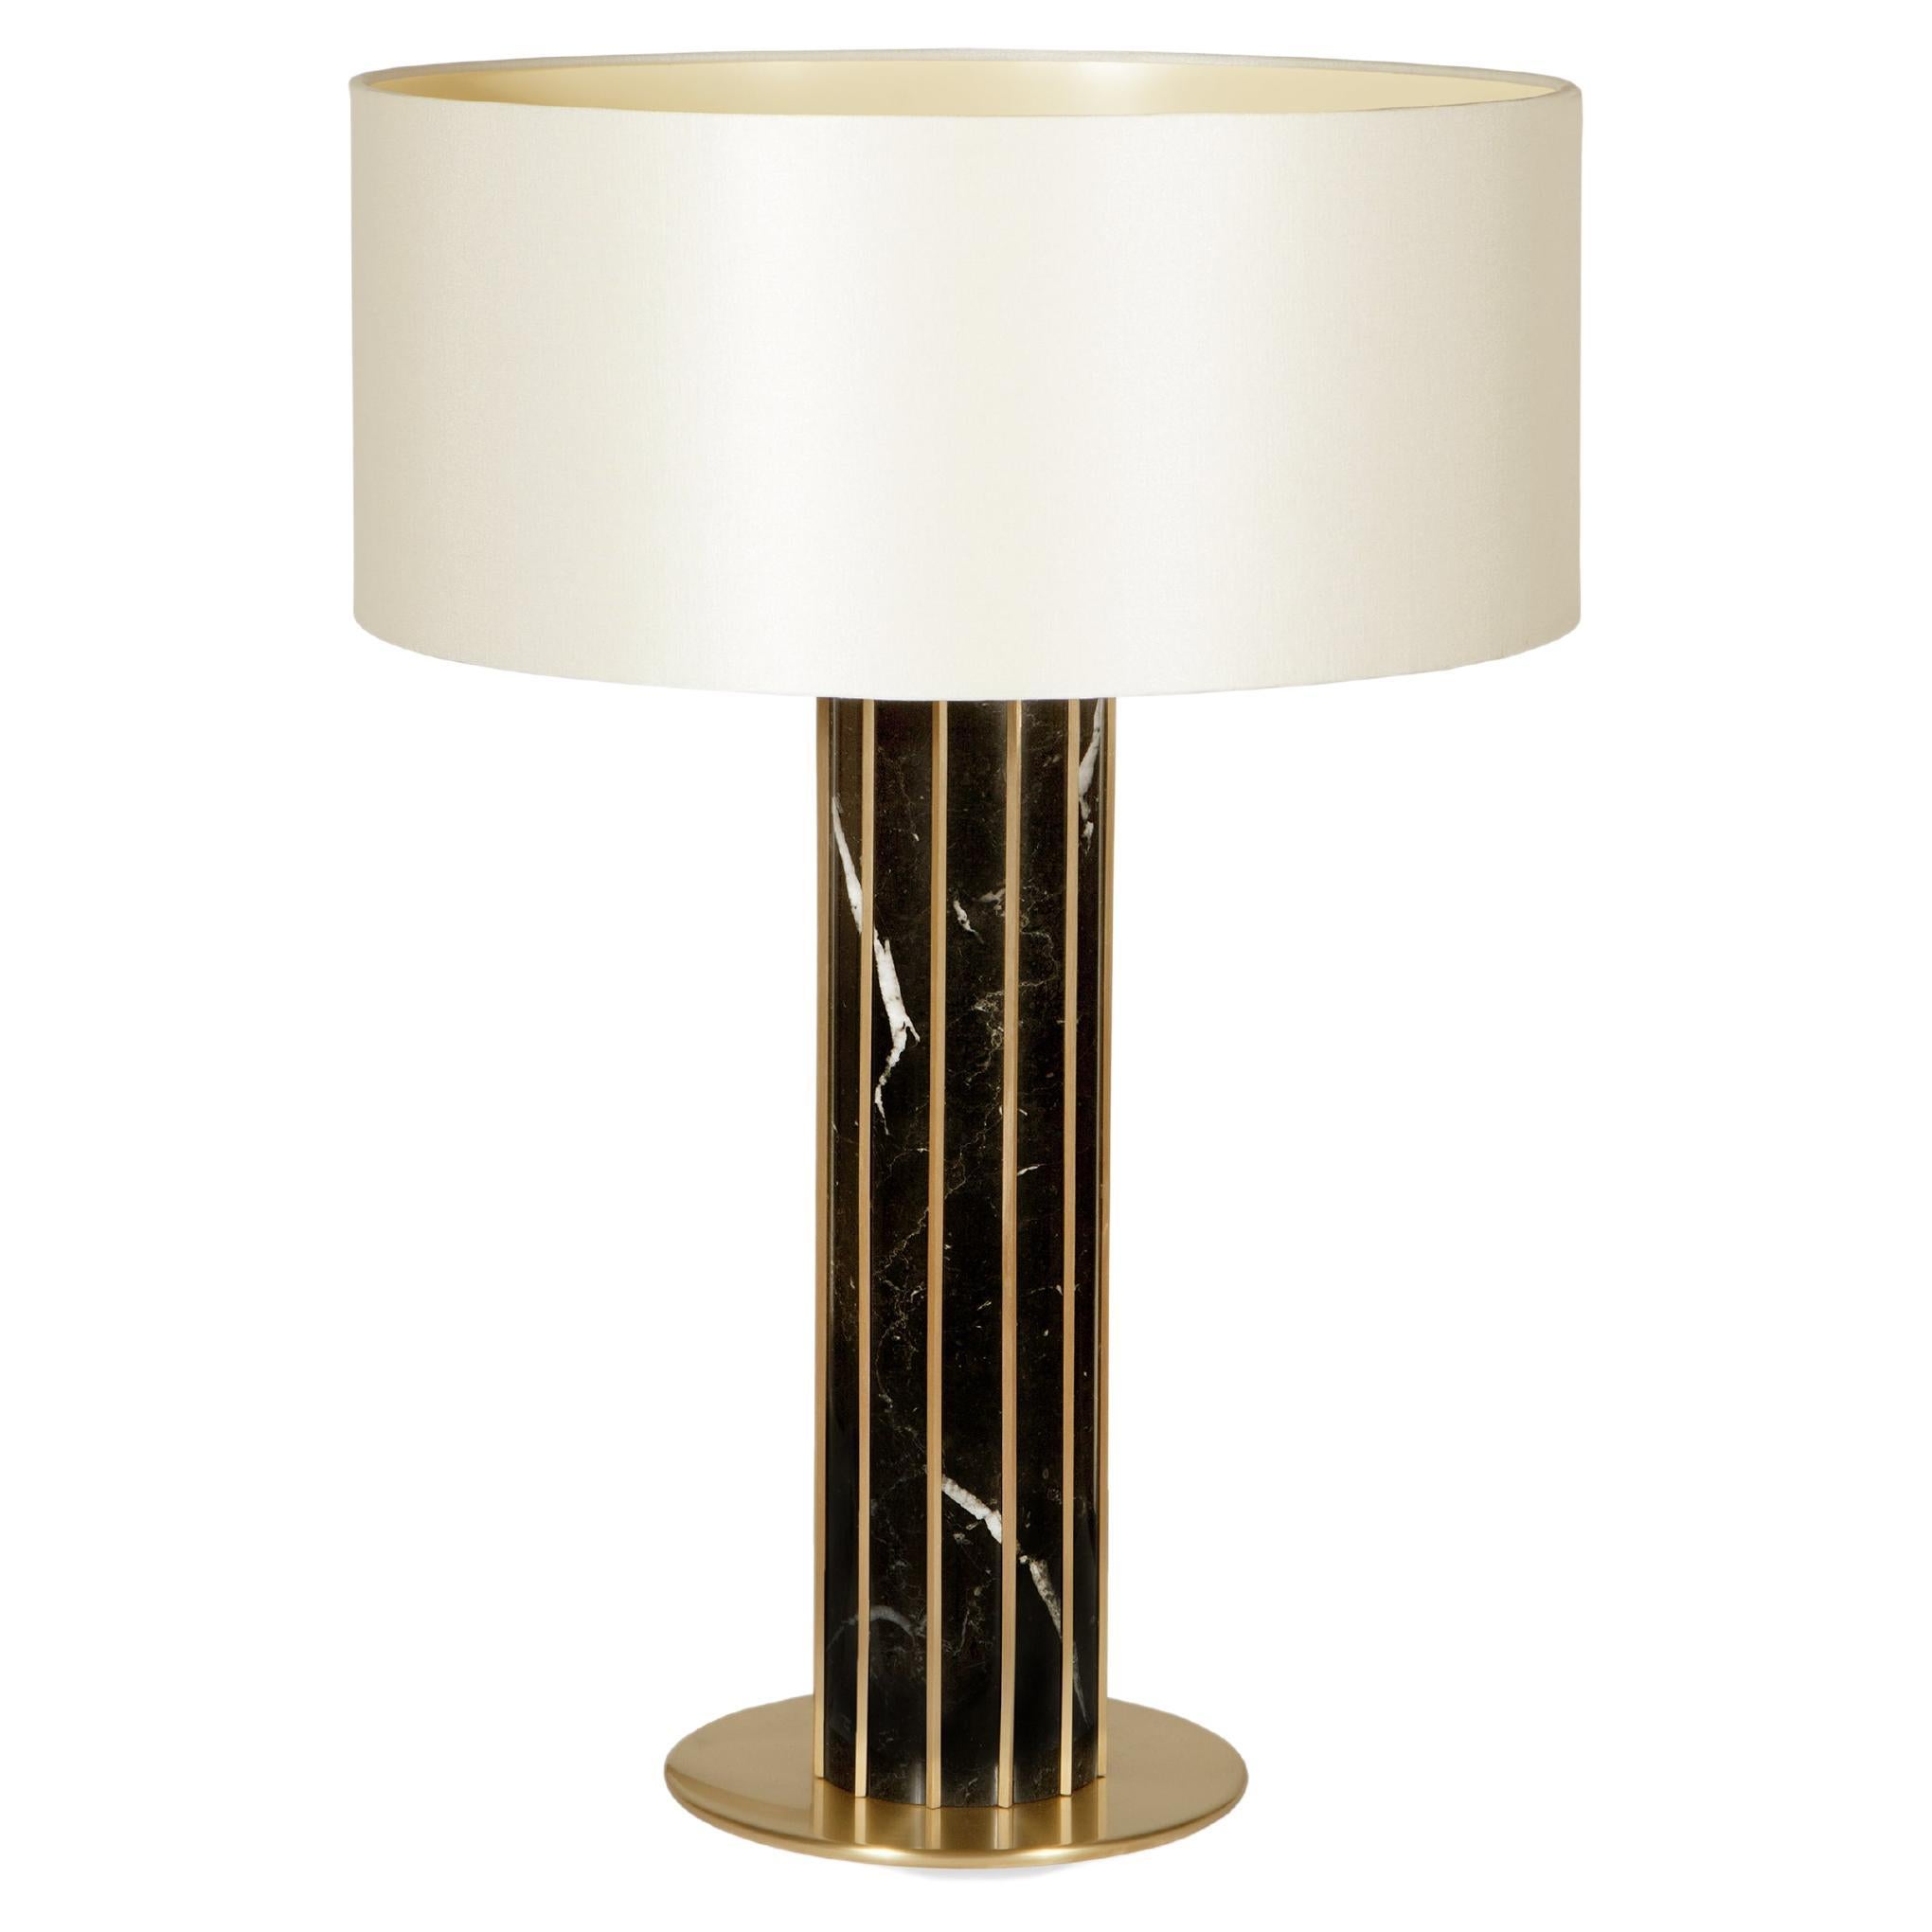 Seagram Nero Marquina Marble Table Lamp by InsidherLand